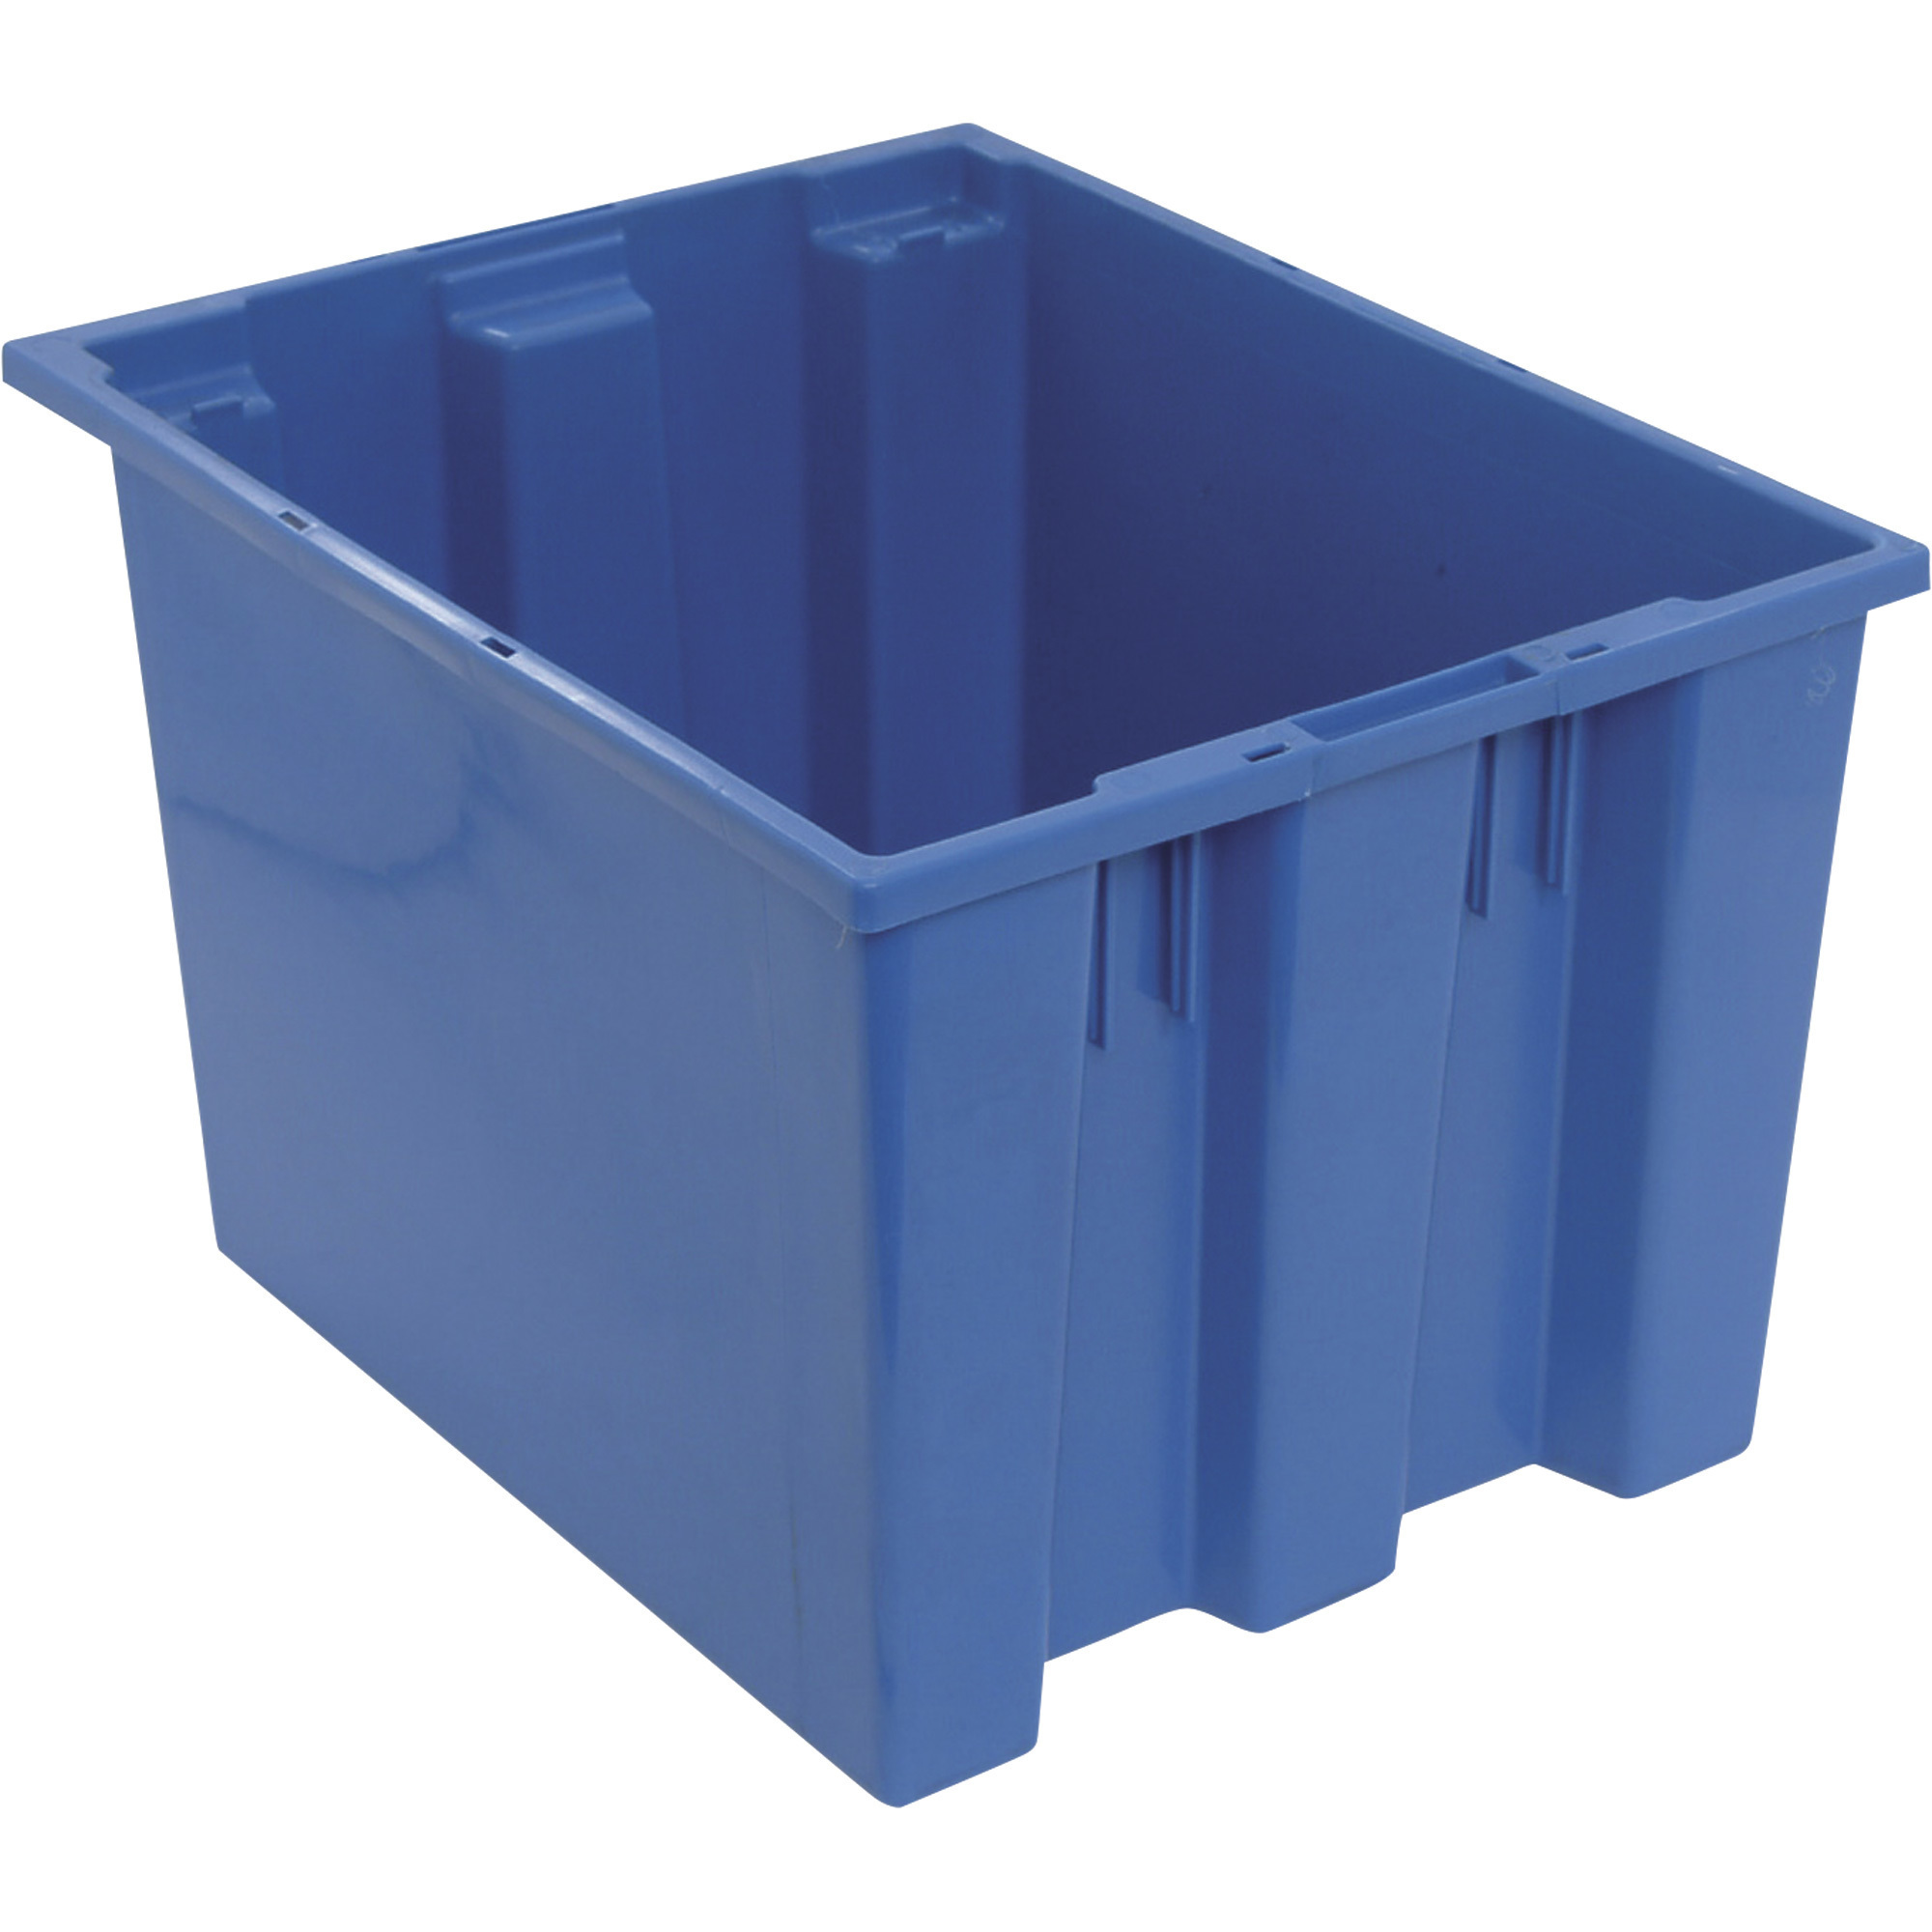 Quantum Storage Stack and Nest Tote Bin, 19 1/2Inch x 15 1/2Inch x 13Inch Size, Blue, Carton of 6, Model SNT195BLCS